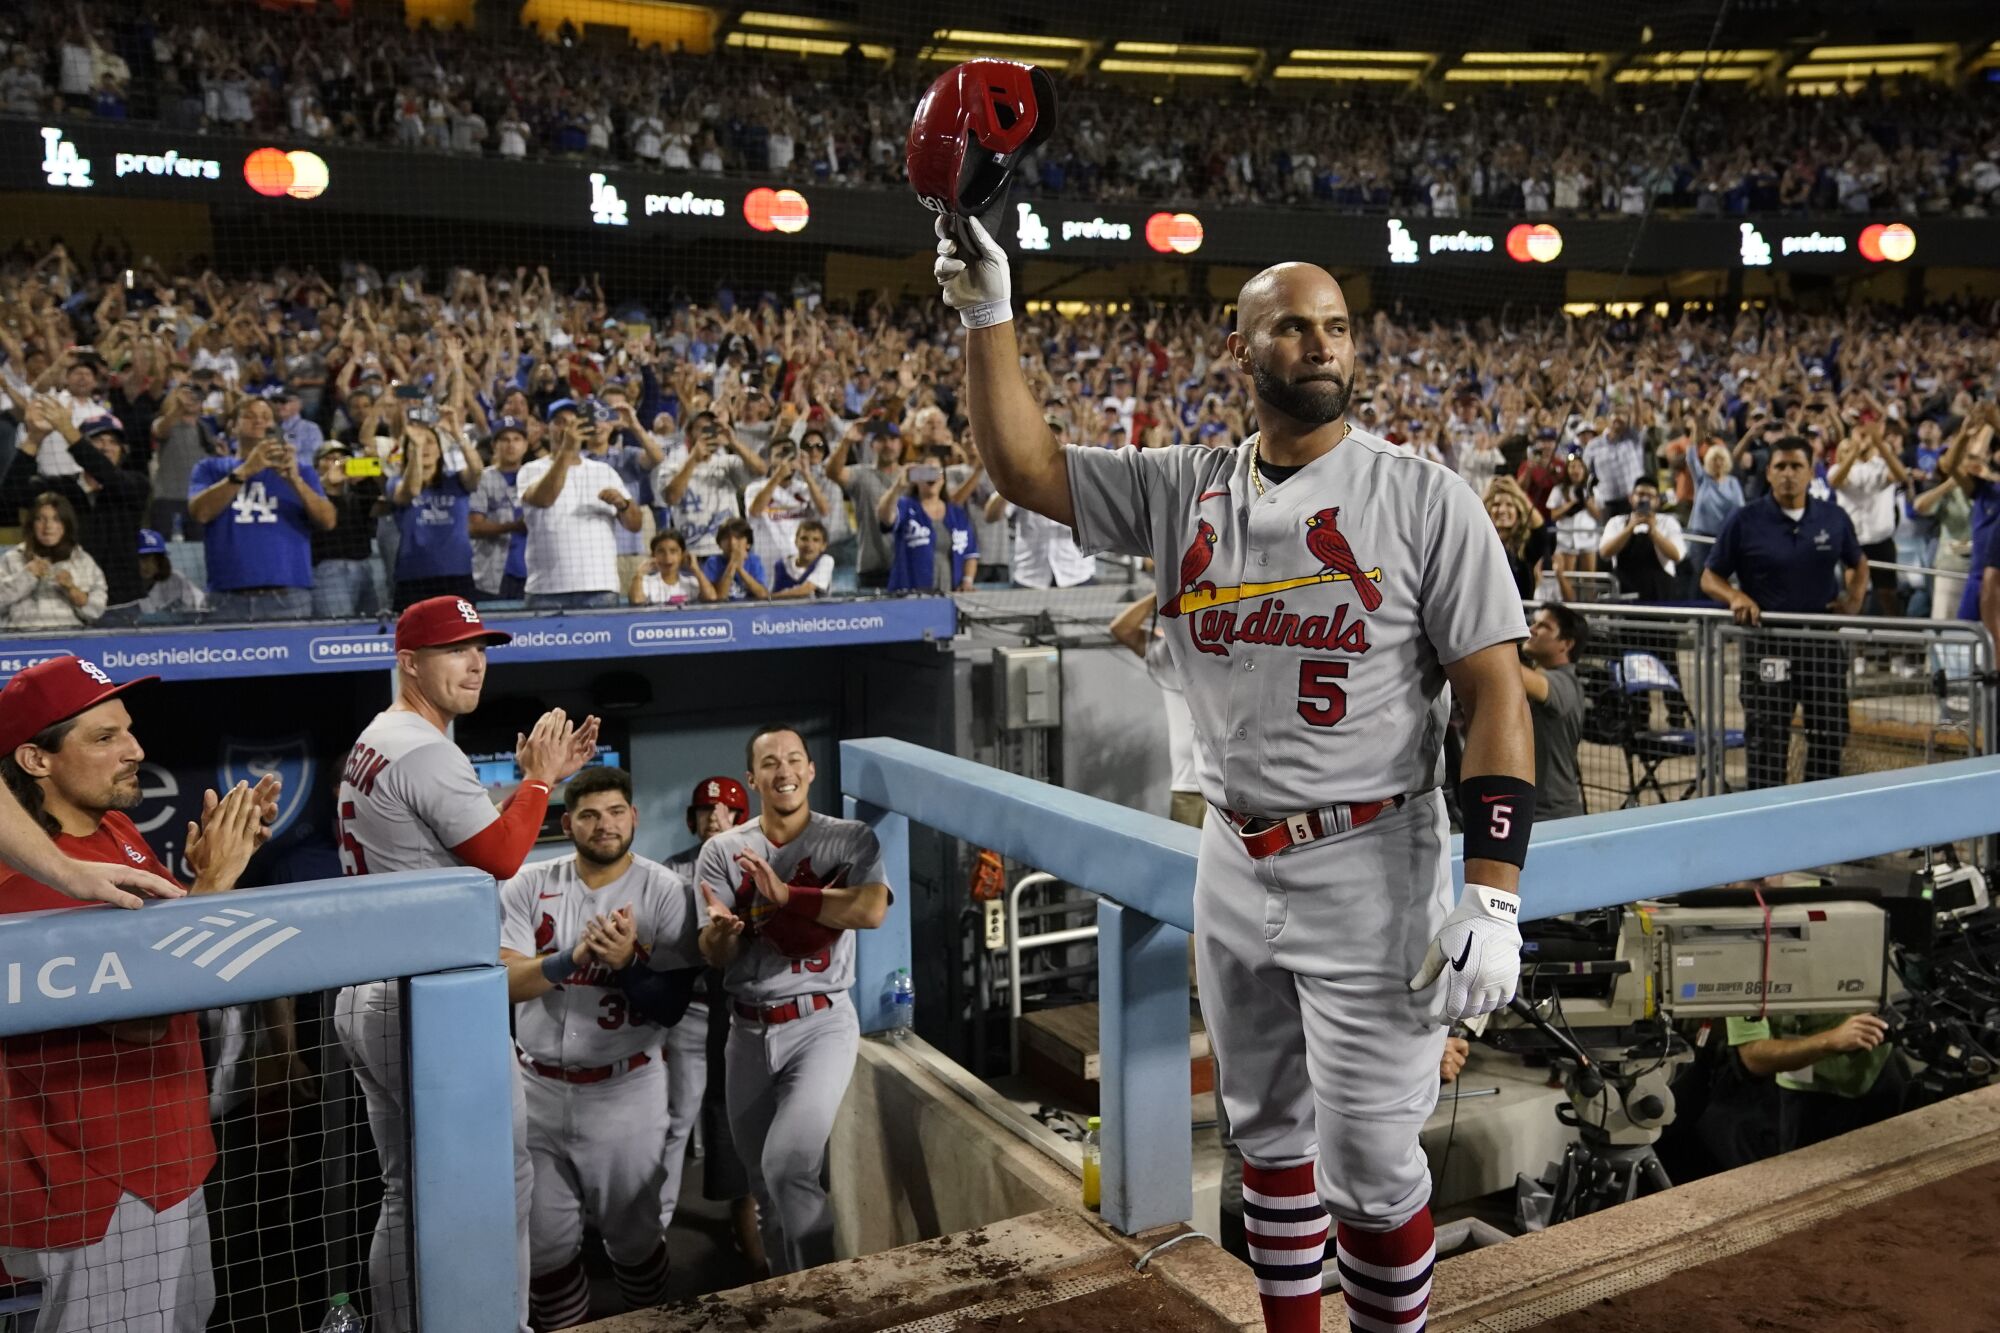 St. Louis Cardinals Designated Hitter Albert Pujols greets fans as he is honored.